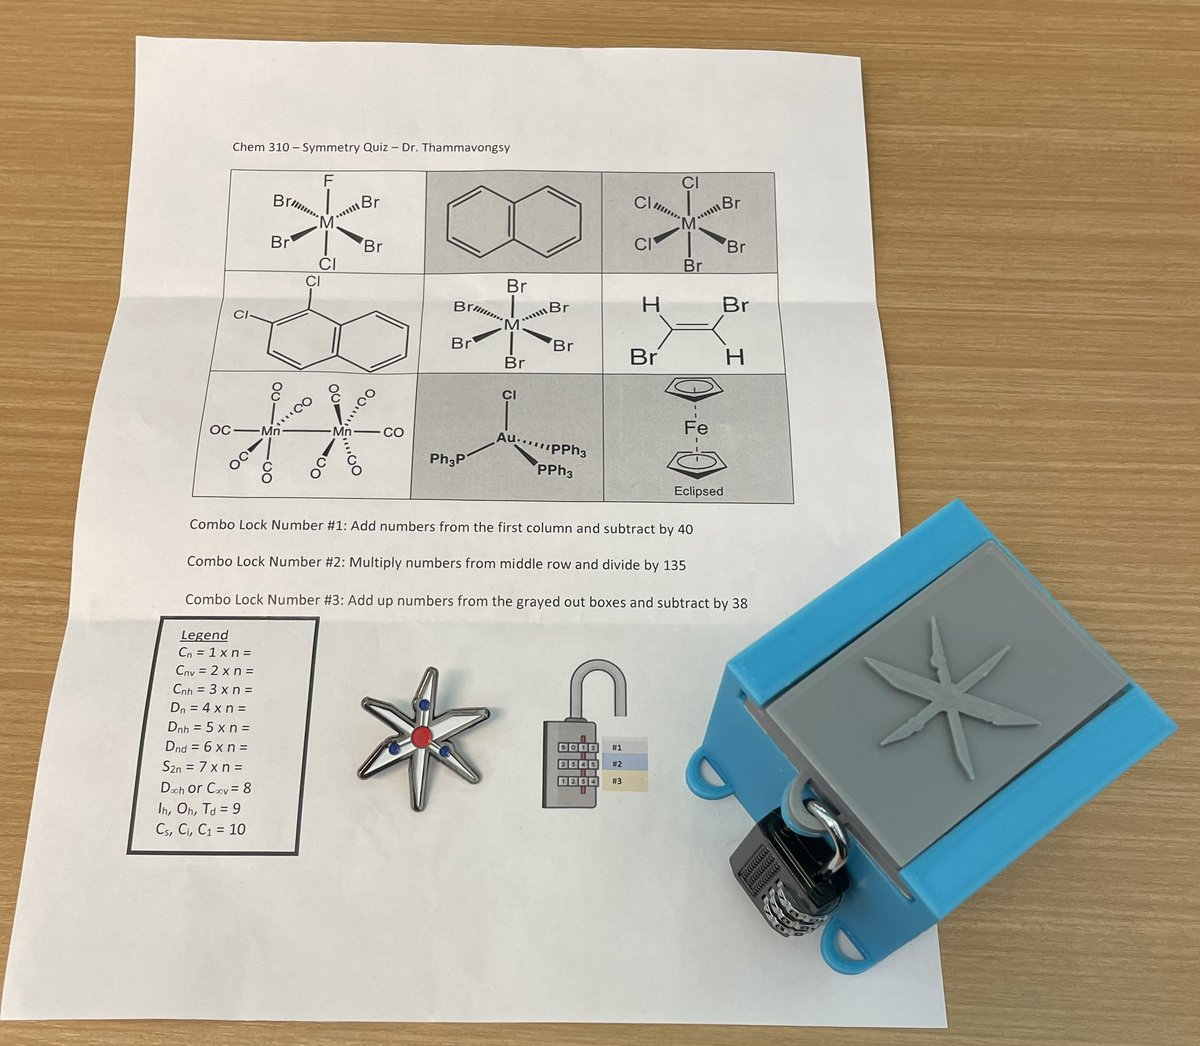 Got creative with the Point Group Quiz today. Had the students group up. Added a lockbox component. Throw in a symmetry pin badge as the prize. Instant keeper for future quiz or learning activity. #inorganicchemistry